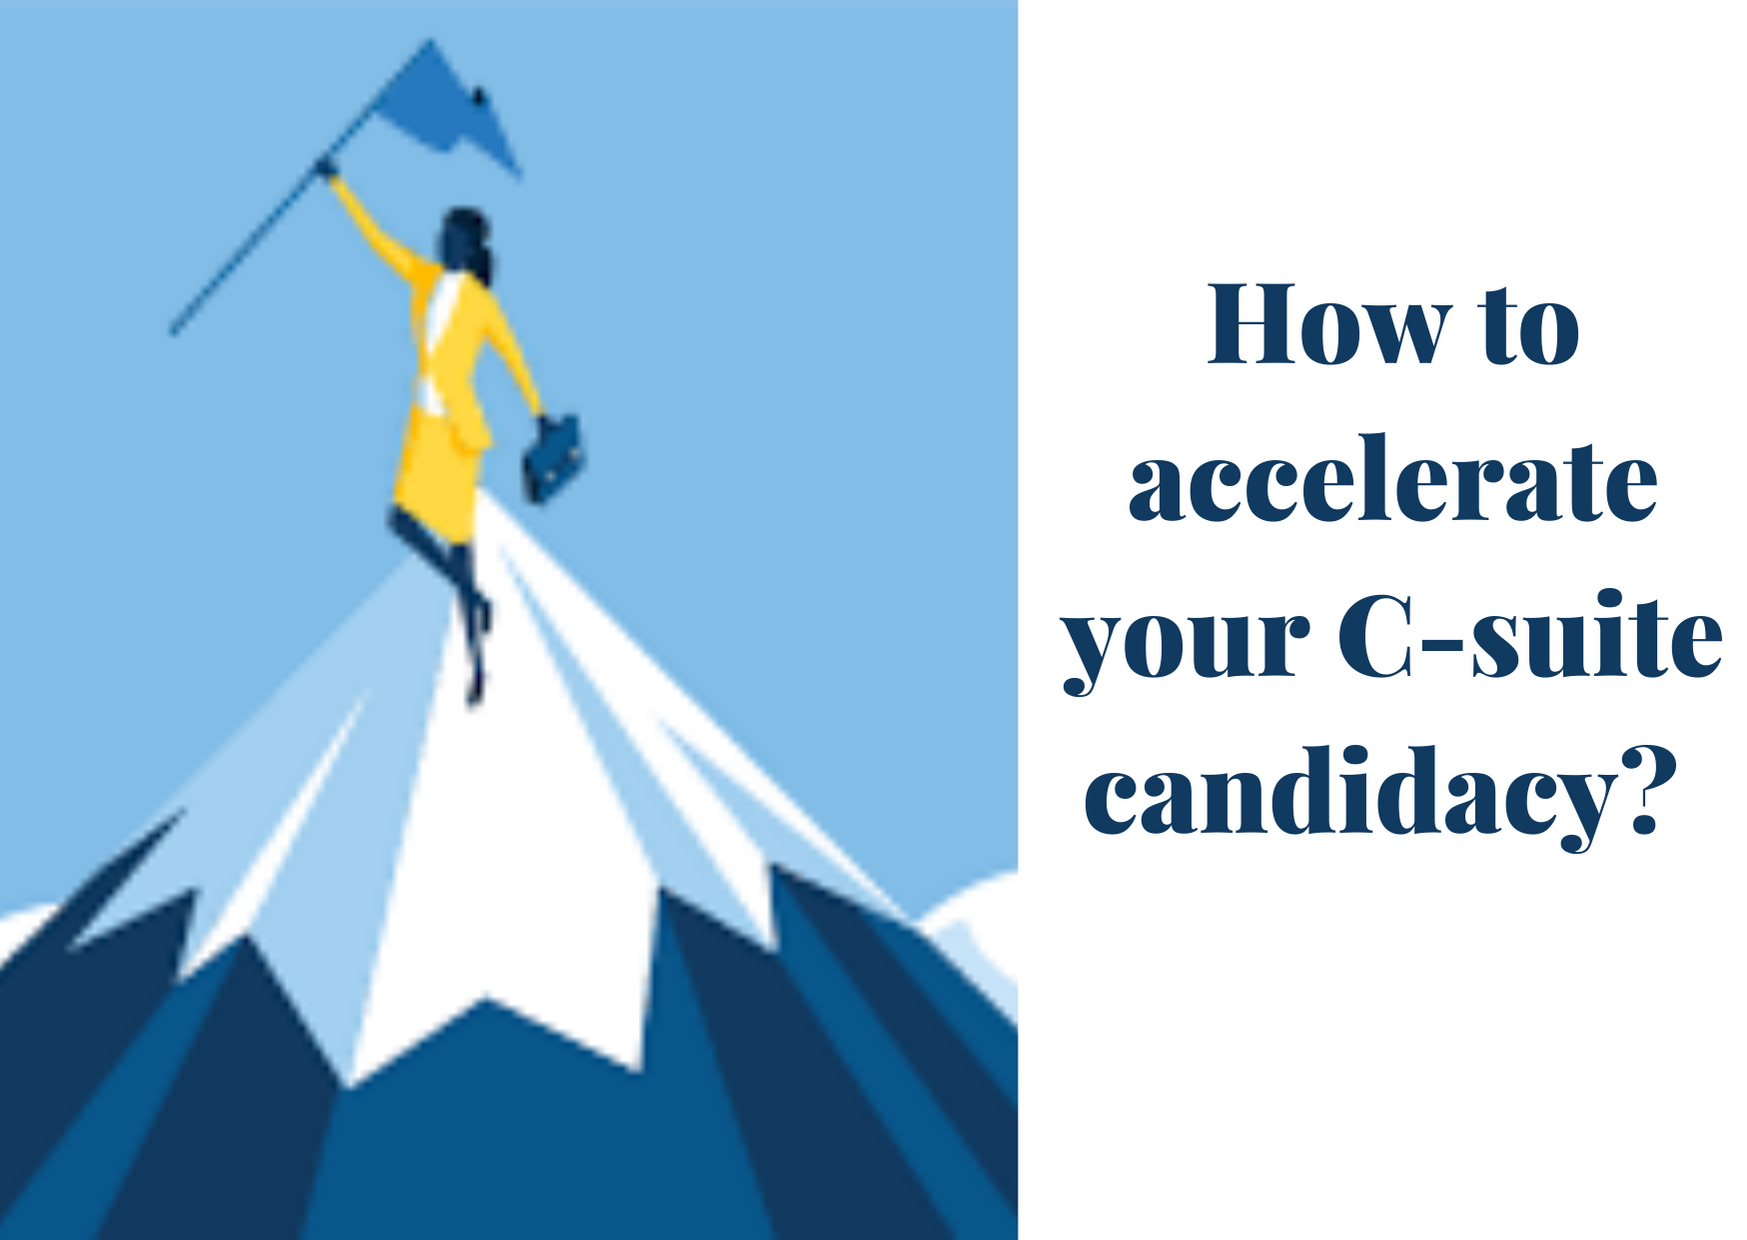 How to accelerate your C-suite candidacy?